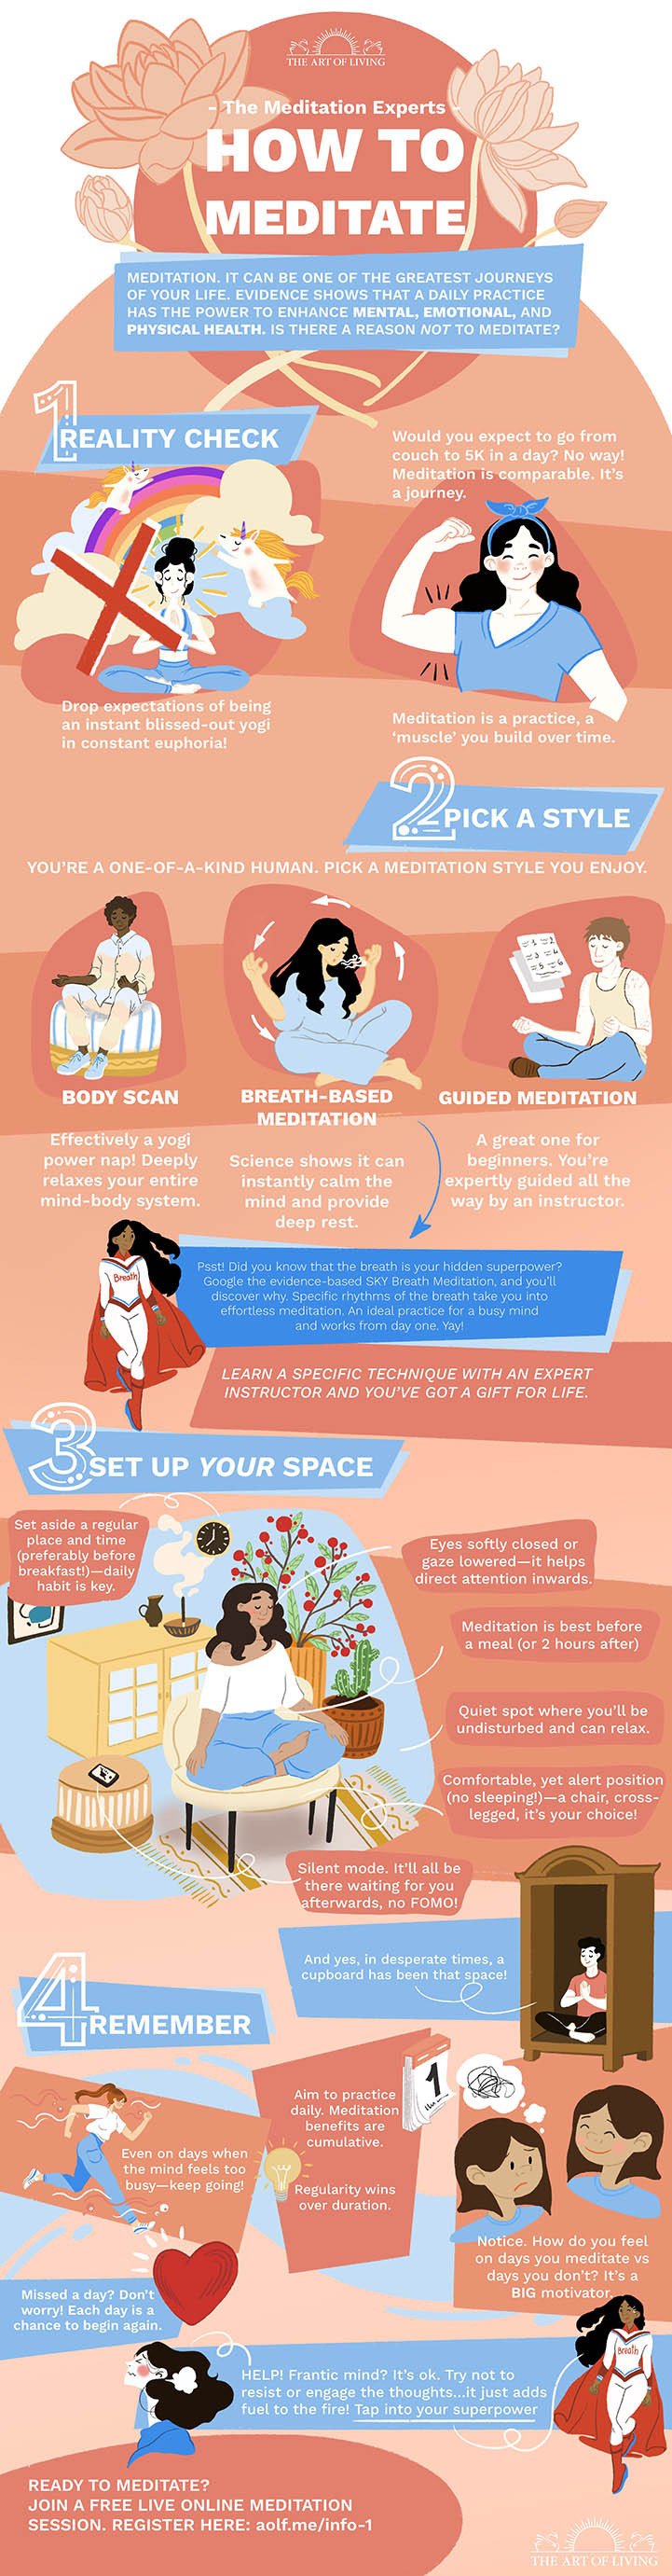 How to meditate infographic